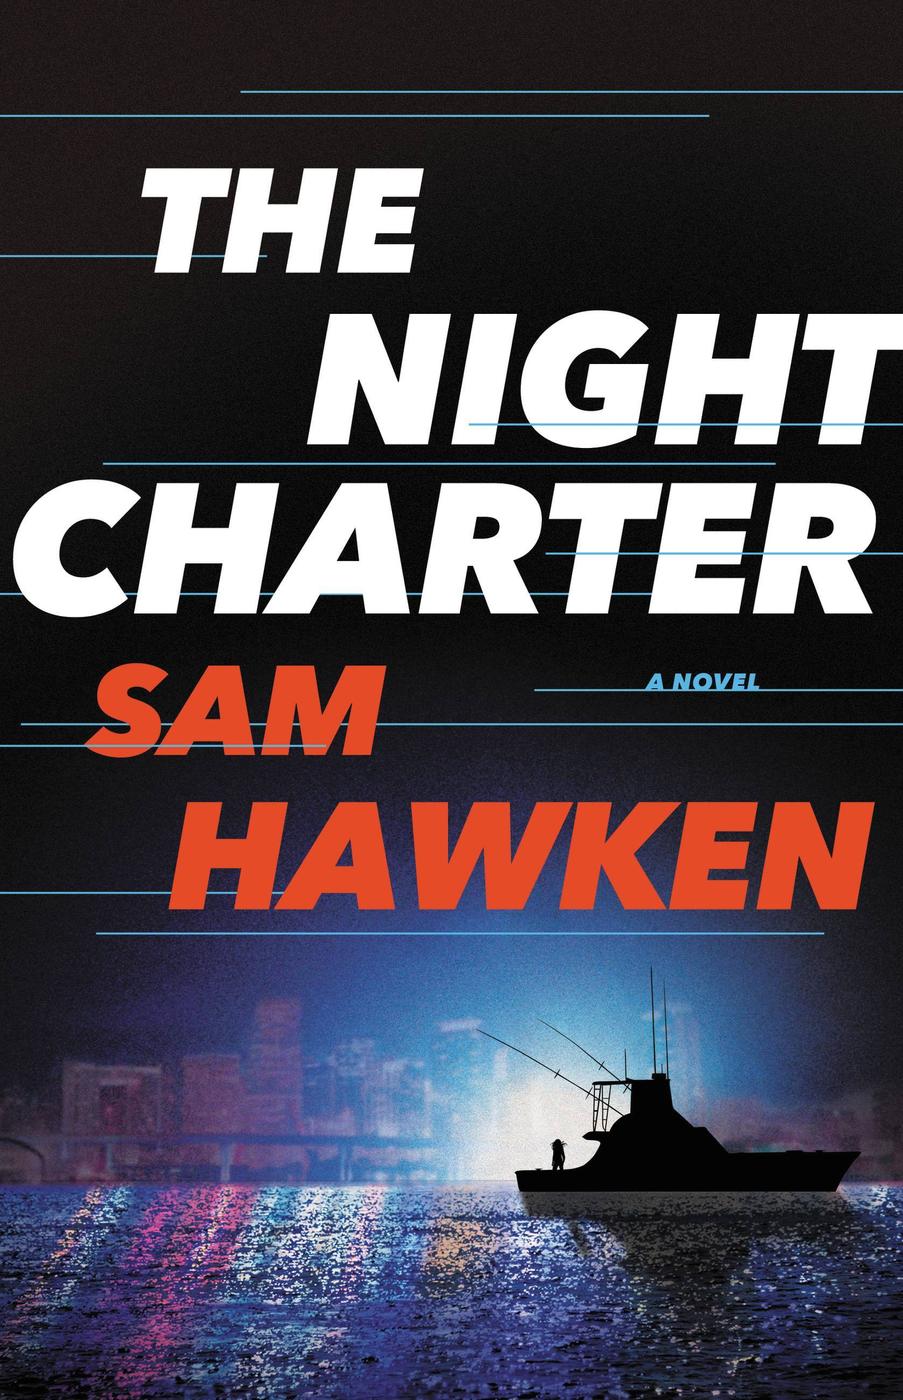 The Night Charter (2015) by Sam Hawken